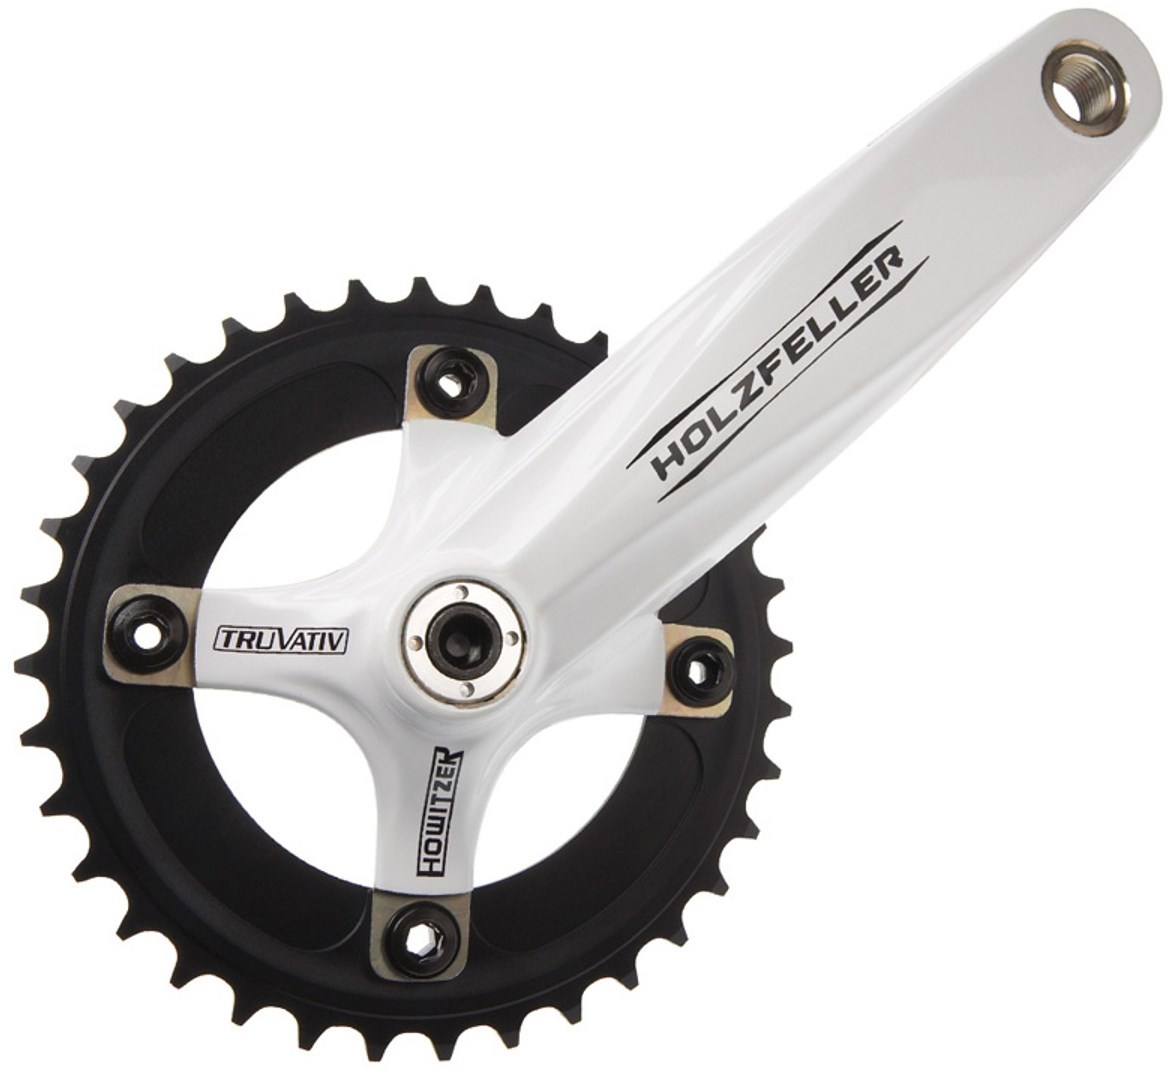 Truvativ Holzfeller 1.1 DH Chainset (fits Howitzer BB) product image